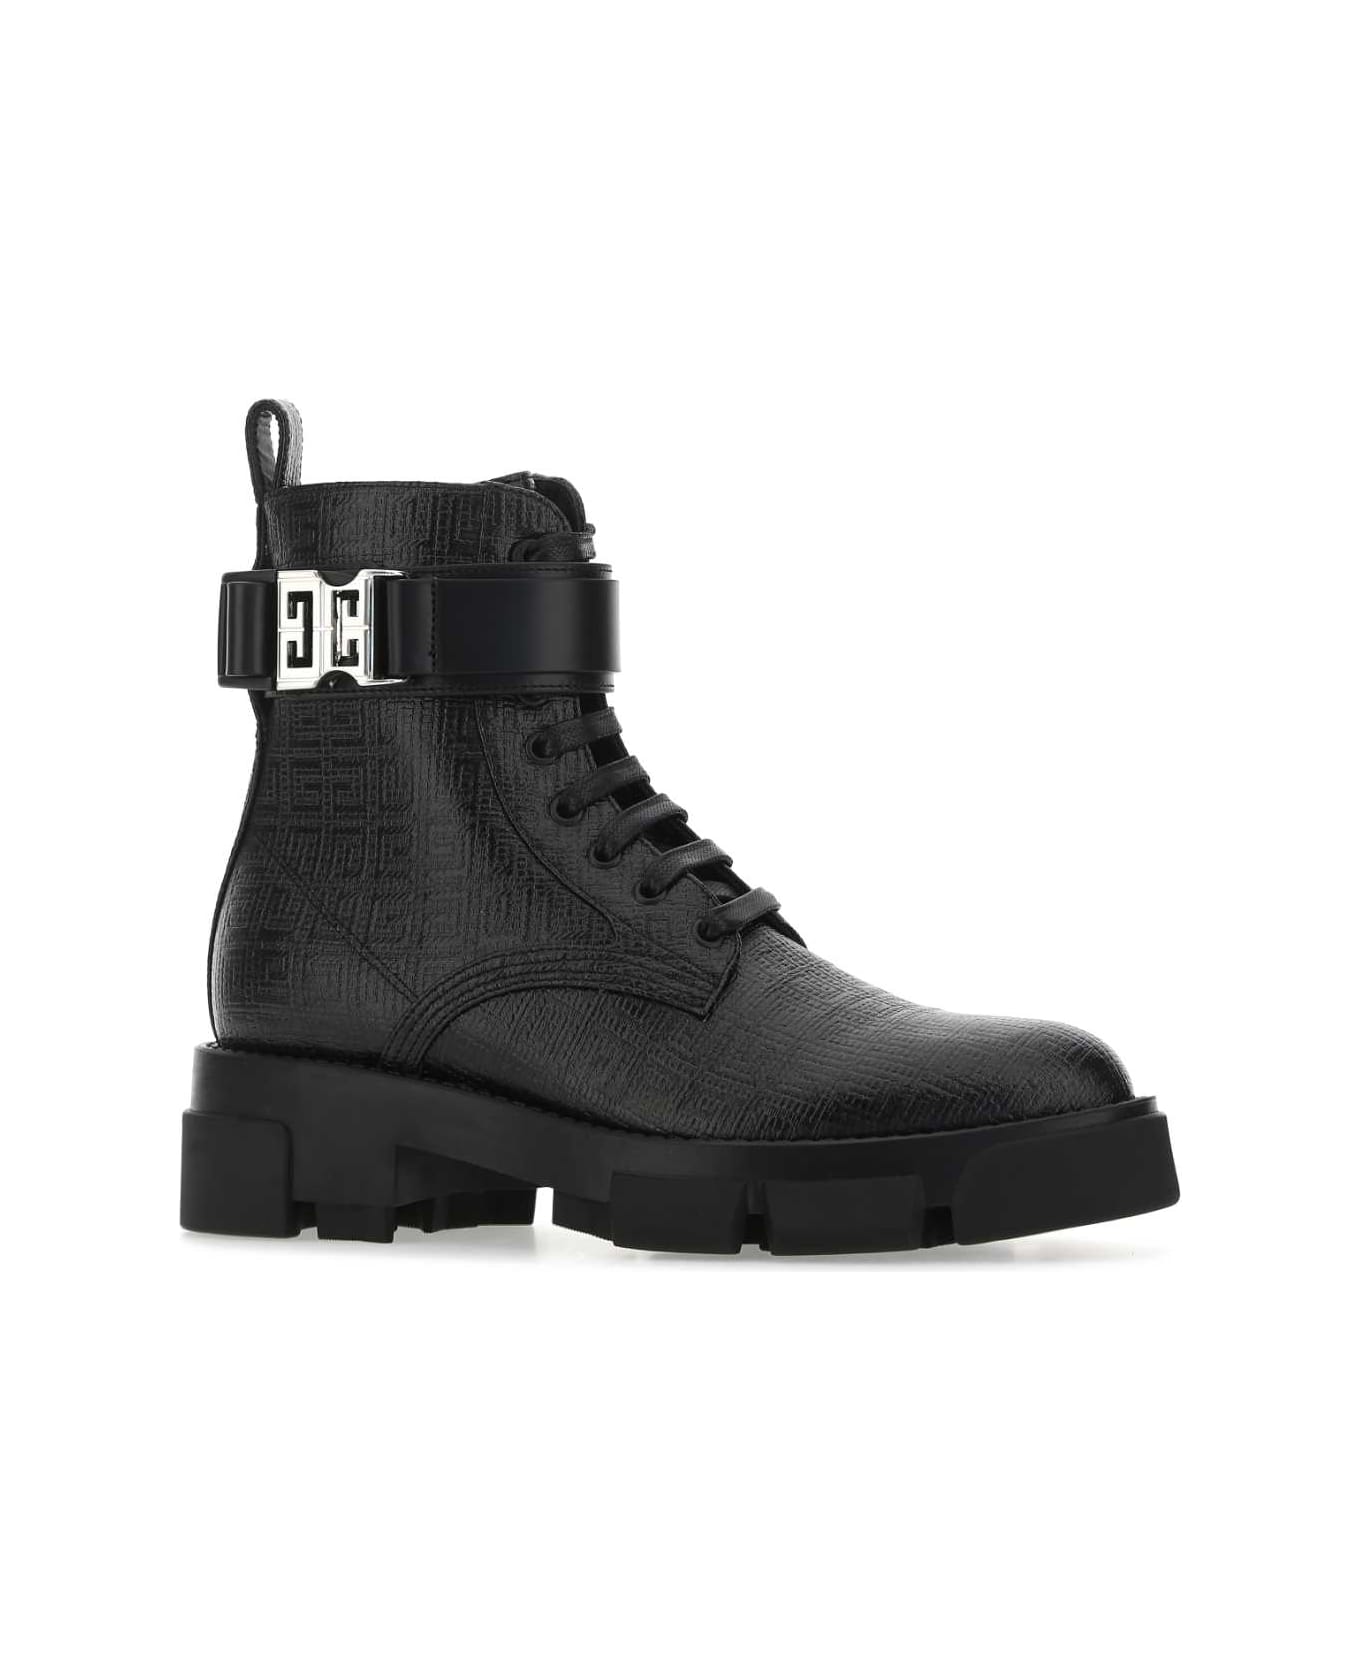 Givenchy Terra Ankle Boots - 001 ブーツ